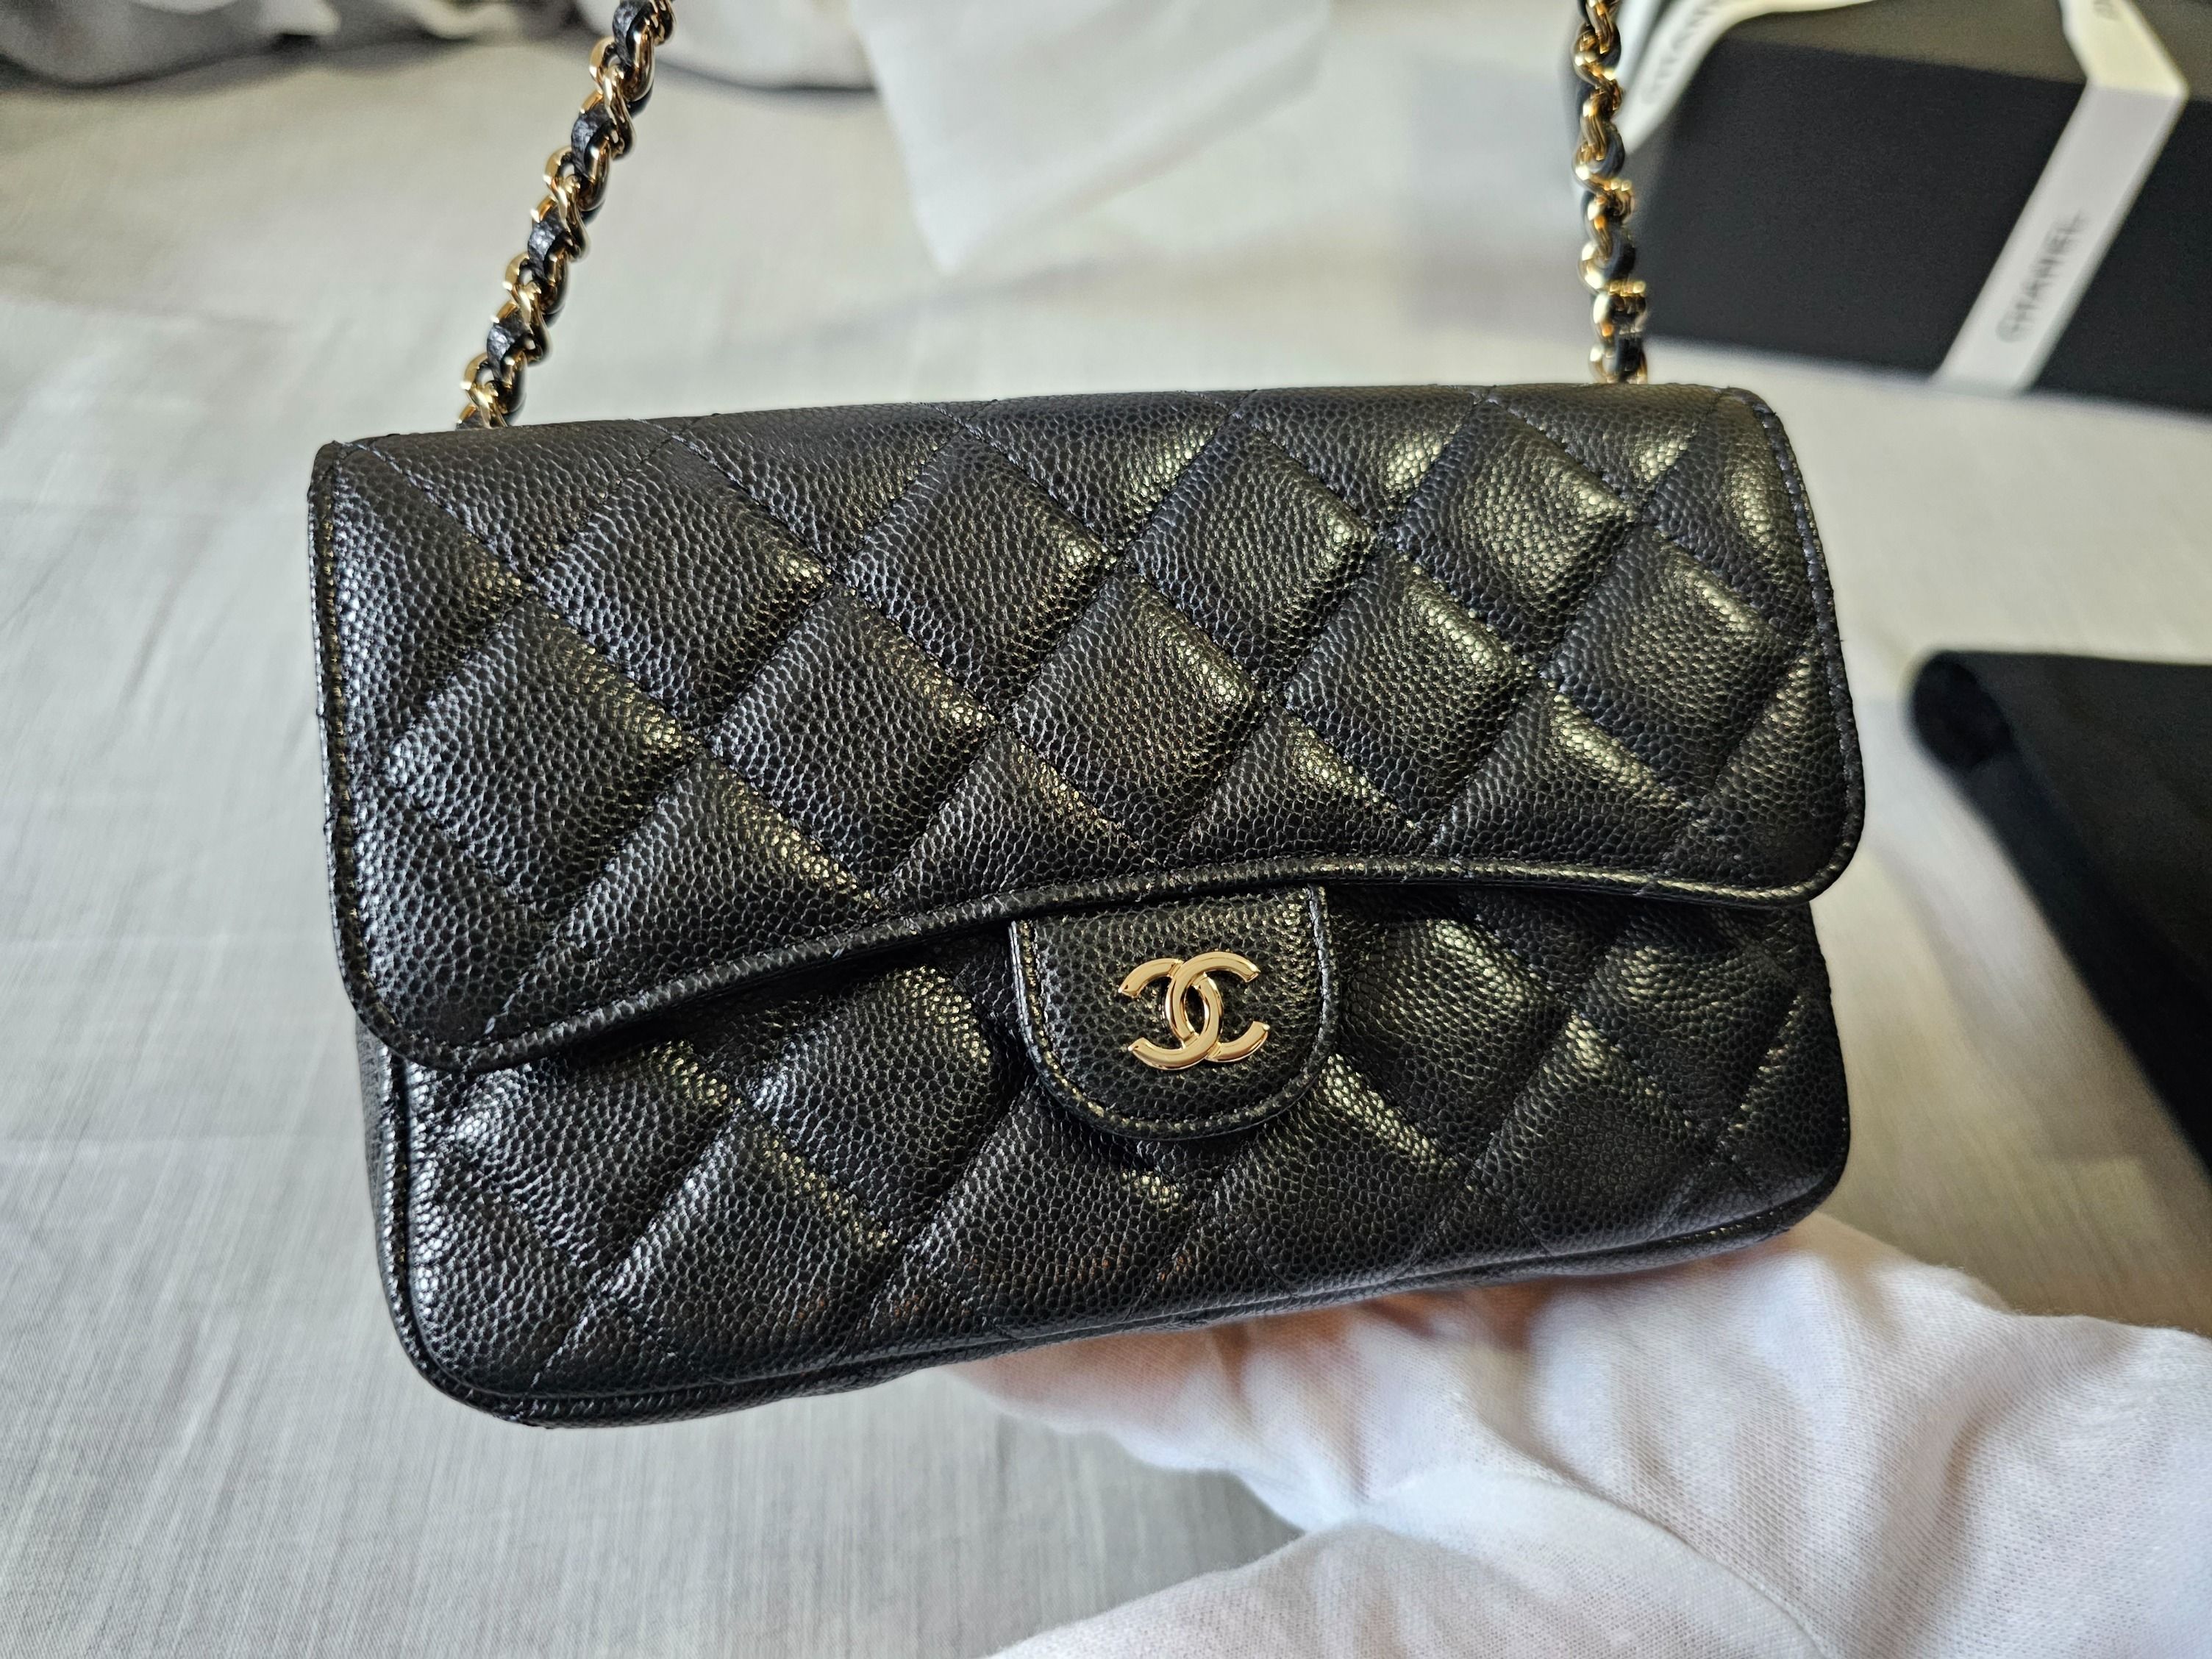 Chanel Classic Flap Phone Holder With Chain Nice Bag Black For